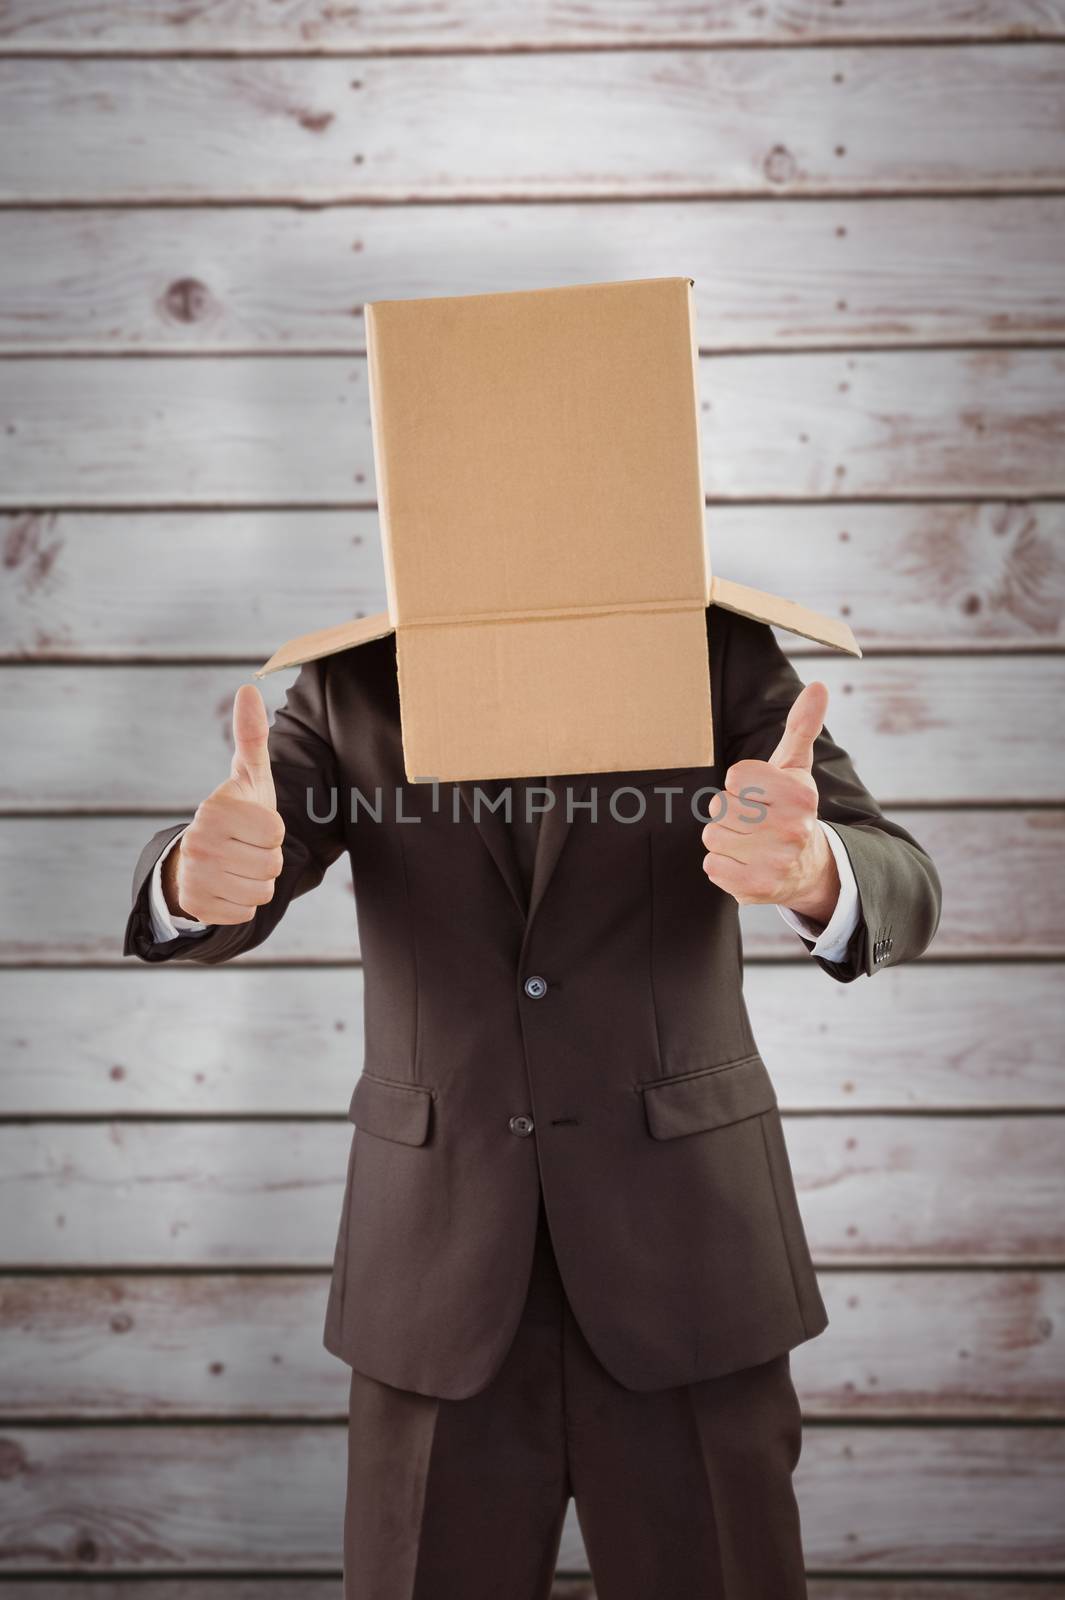 Composite image of anonymous businessman with thumbs up by Wavebreakmedia